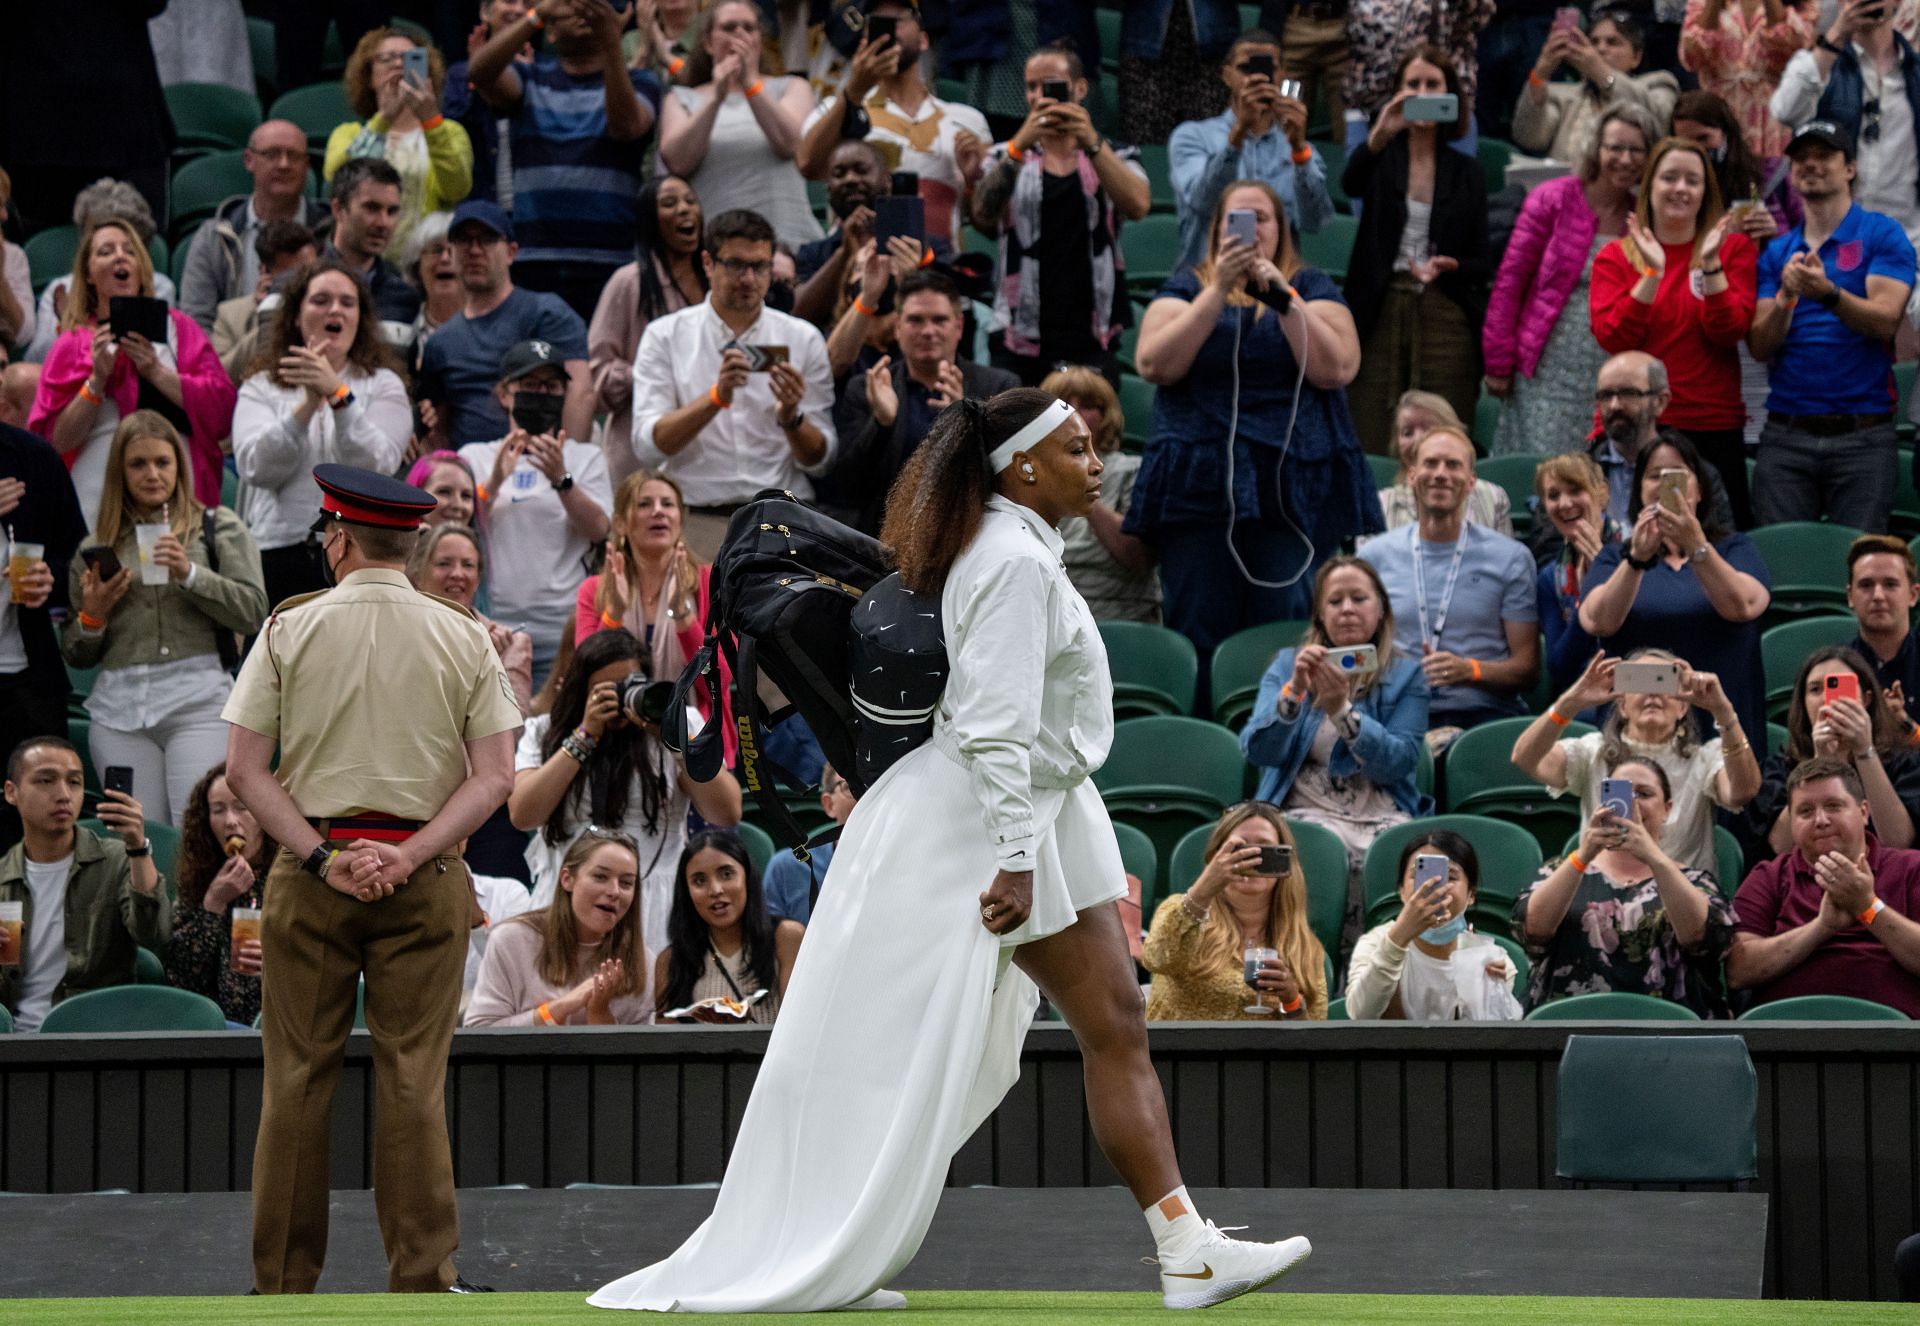 Williams arrives at the Center Court of Wimbledon for her first-round match last year